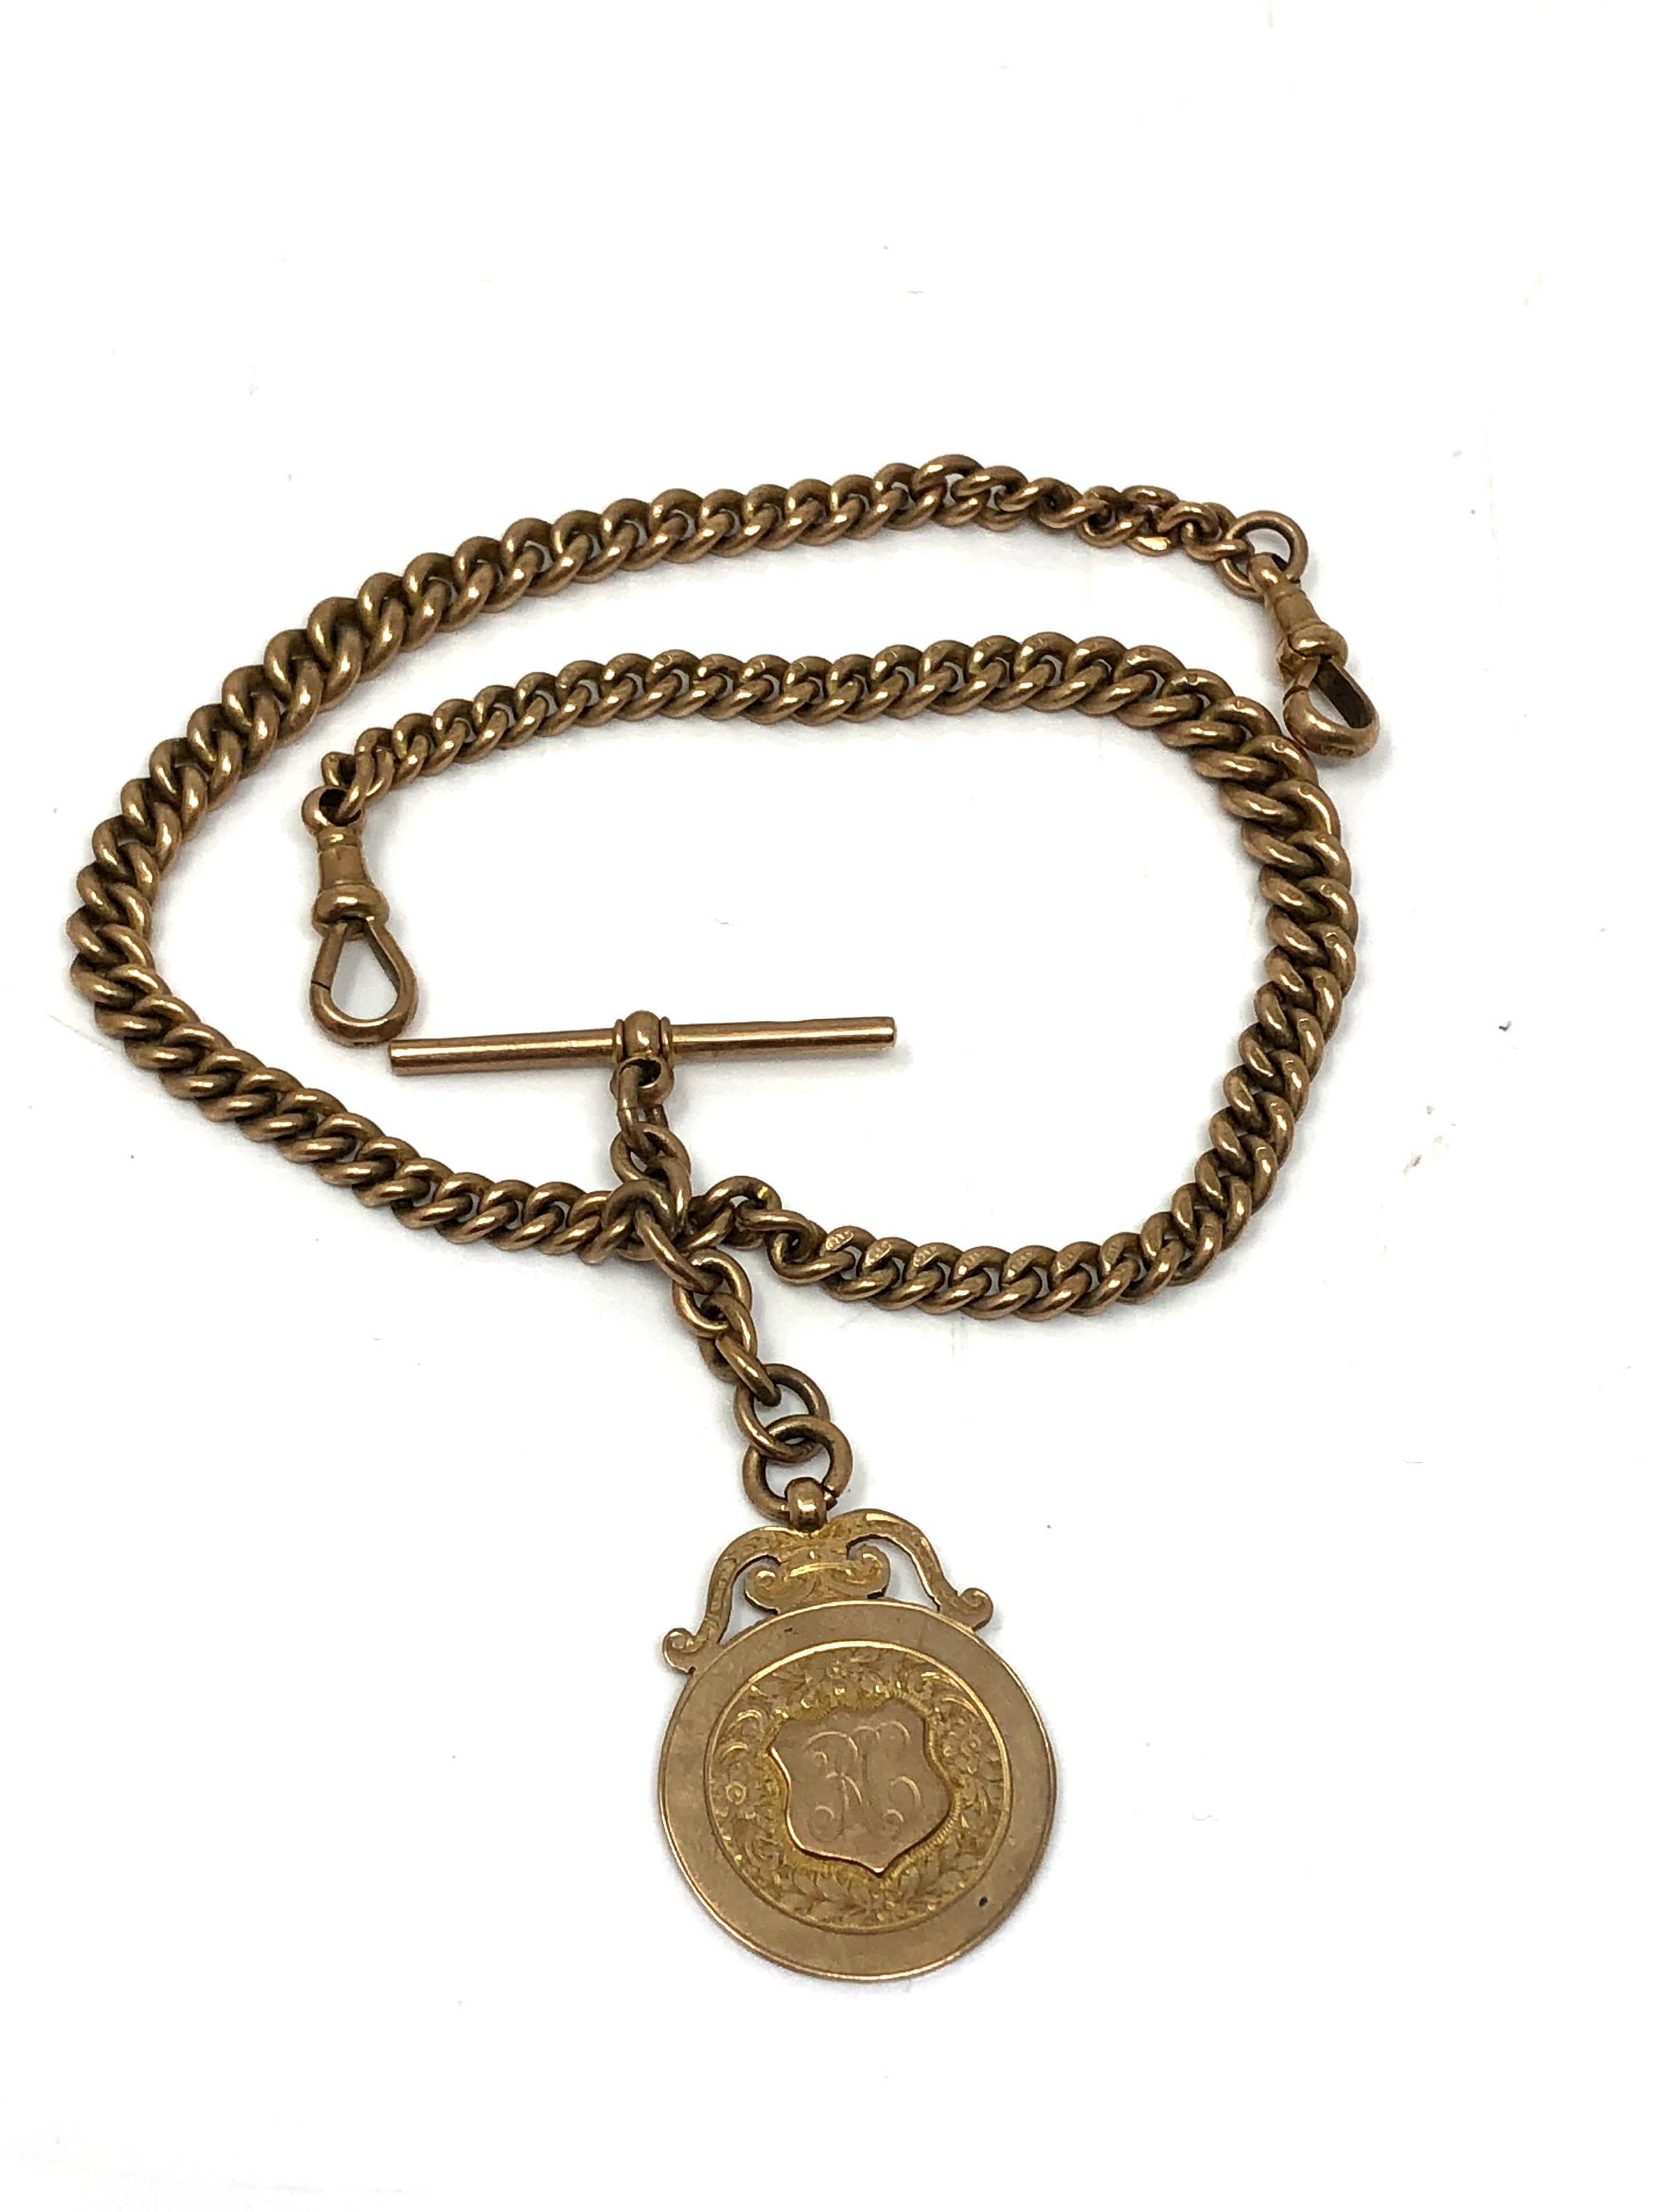 A 9ct gold pocket watch chain with 9ct gold T-bar and 9ct gold fob, weight 54.